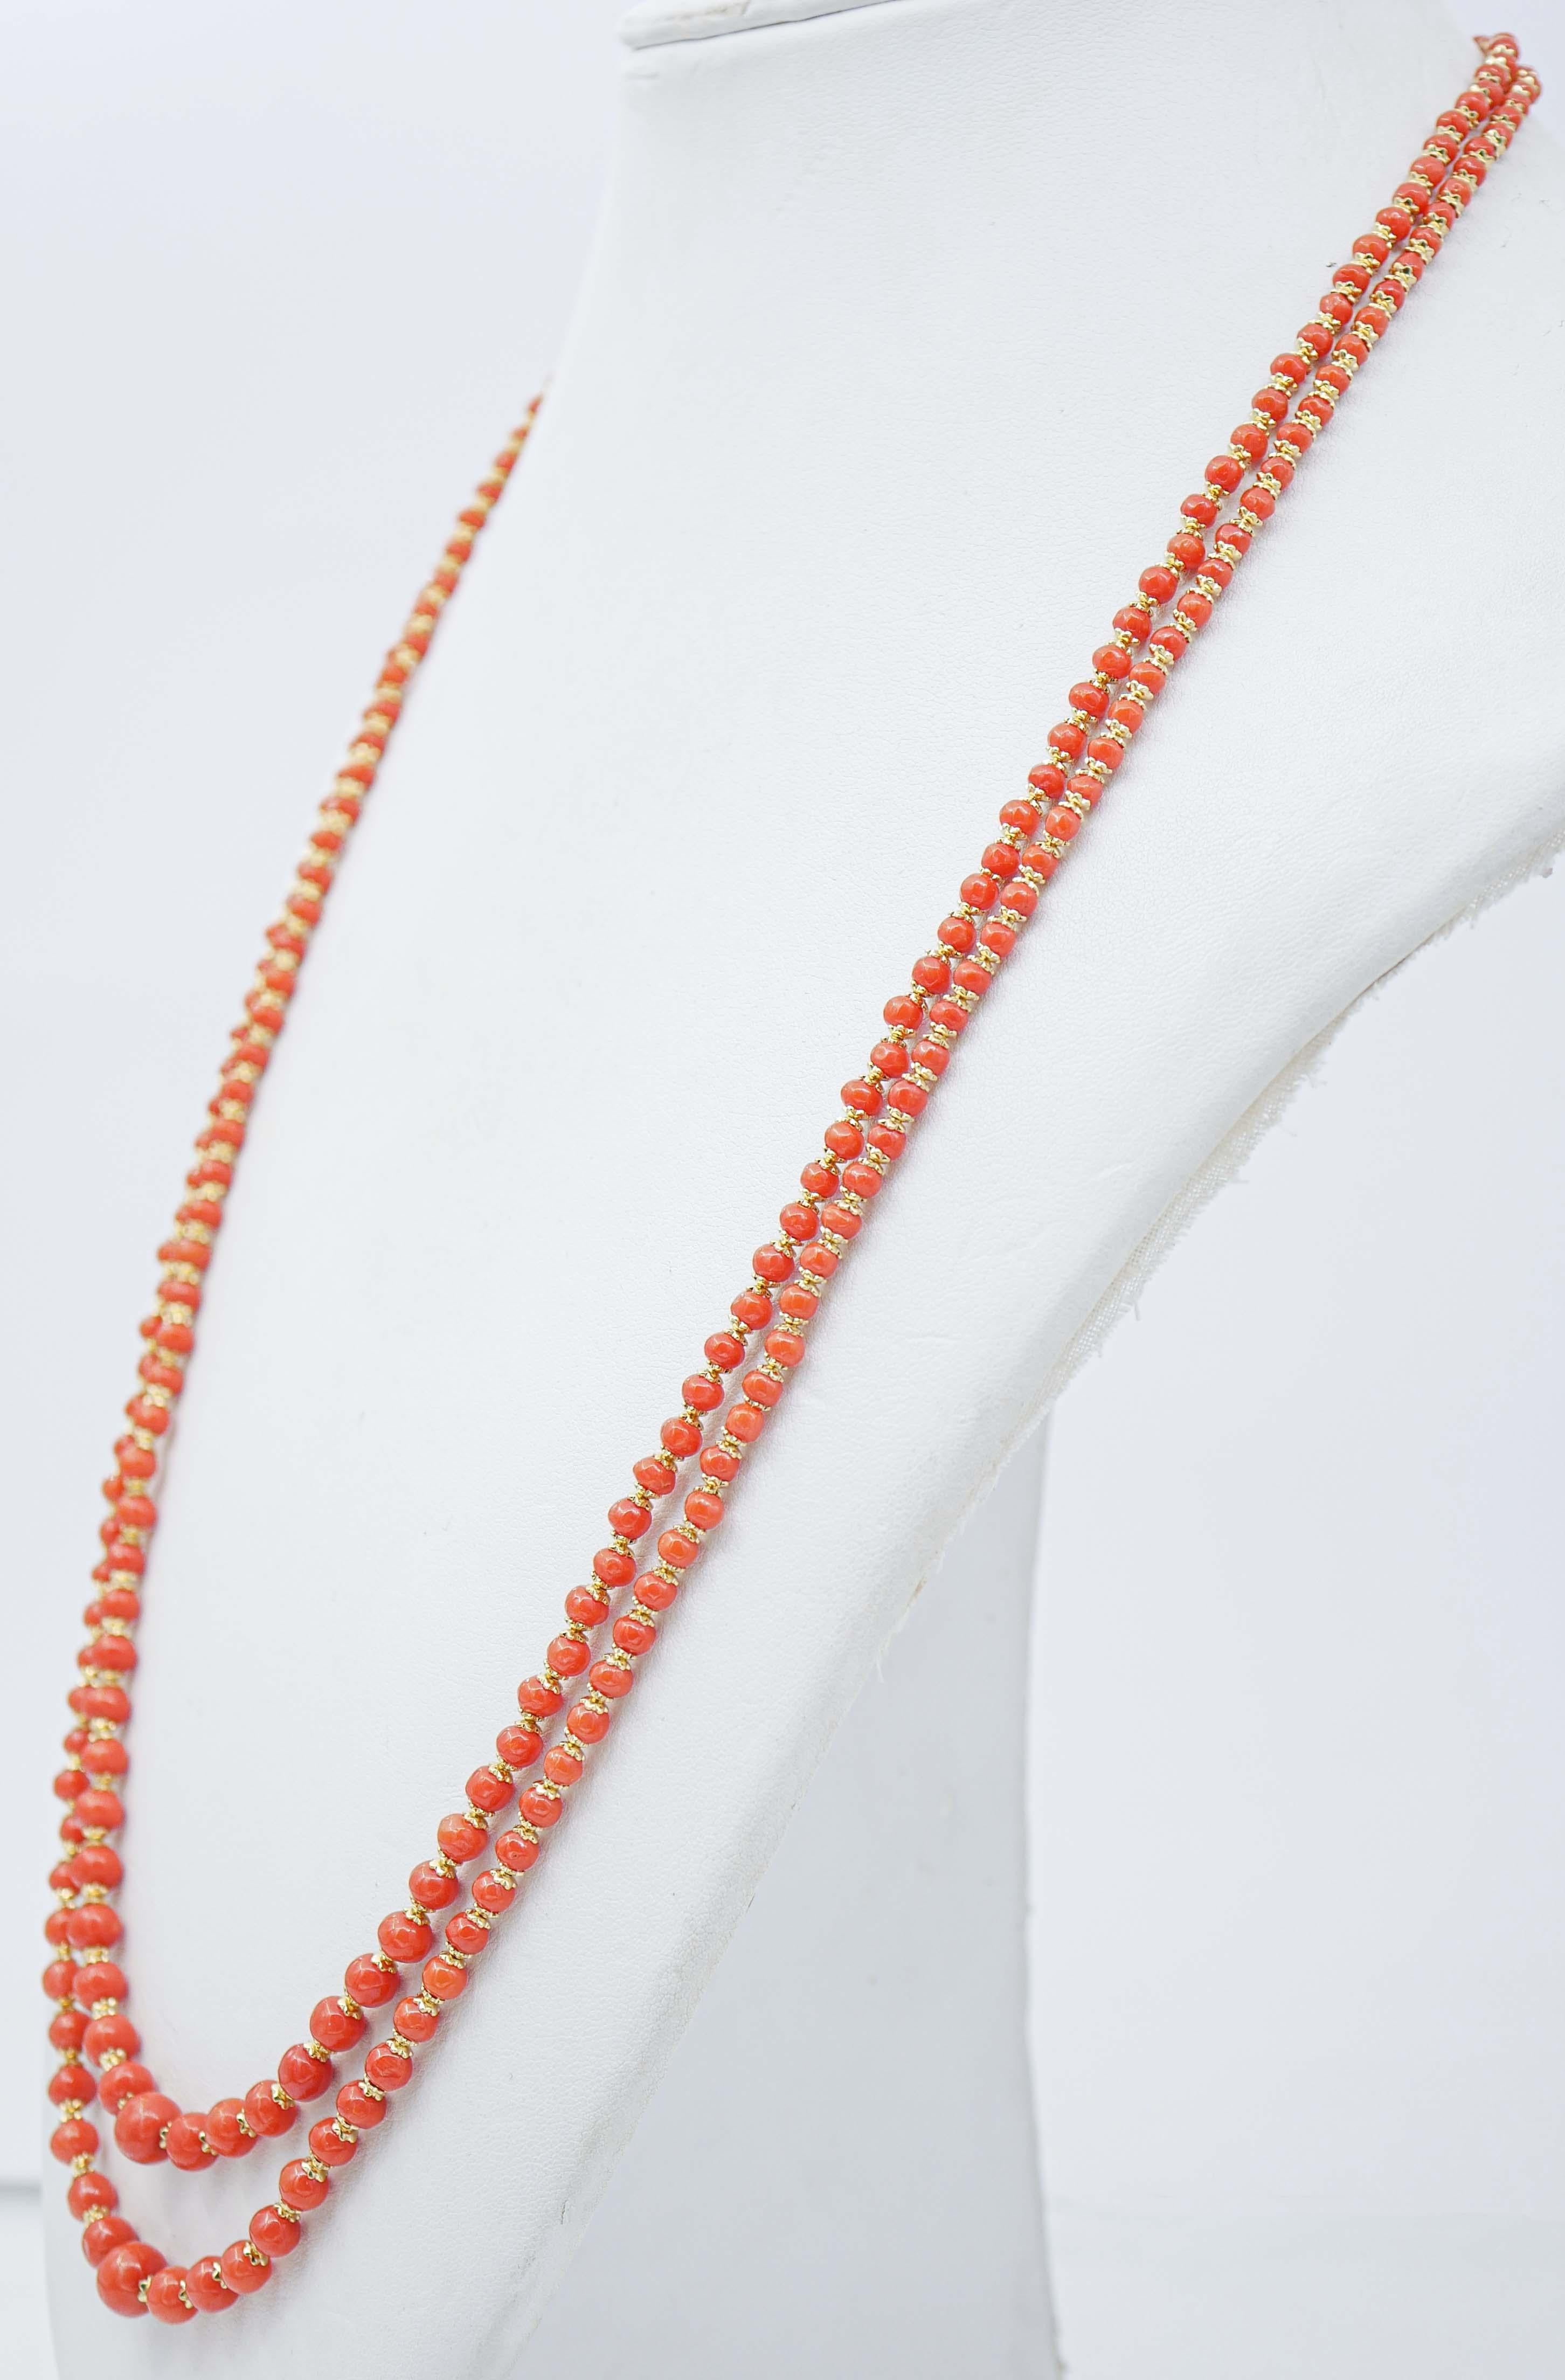 SHIPPING POLICY:
No additional costs will be added to this order.
Shipping costs will be totally covered by the seller (customs duties included).

Elegant multi-strands necklace mounted with spheres of coral alternated with small structures in